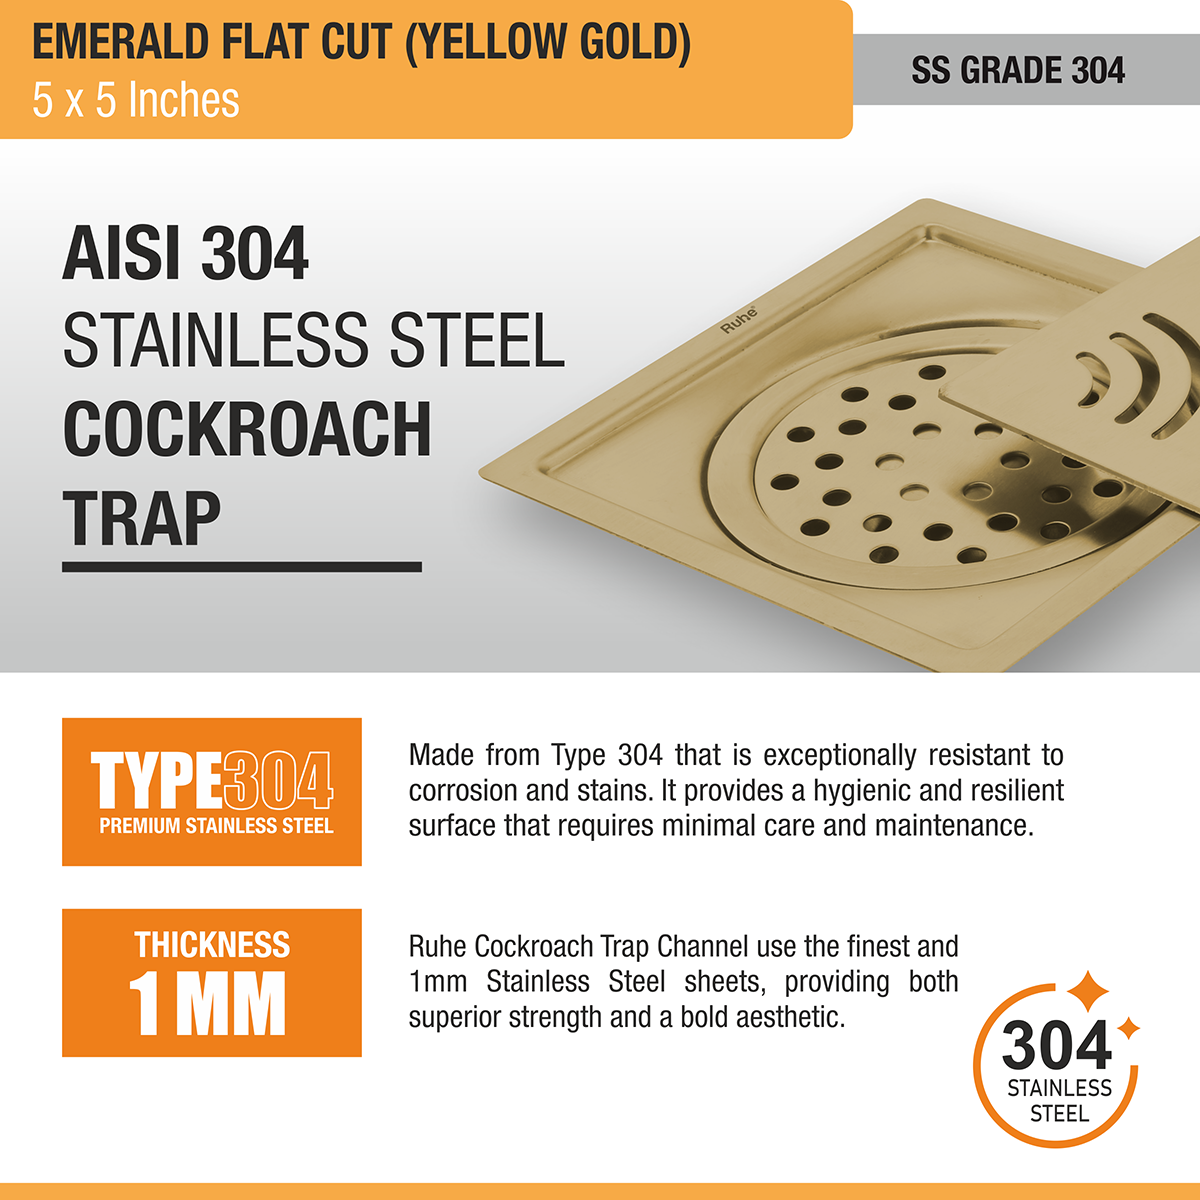 Emerald Square Flat Cut Floor Drain in Yellow Gold PVD Coating (5 x 5 Inches) stainless steel